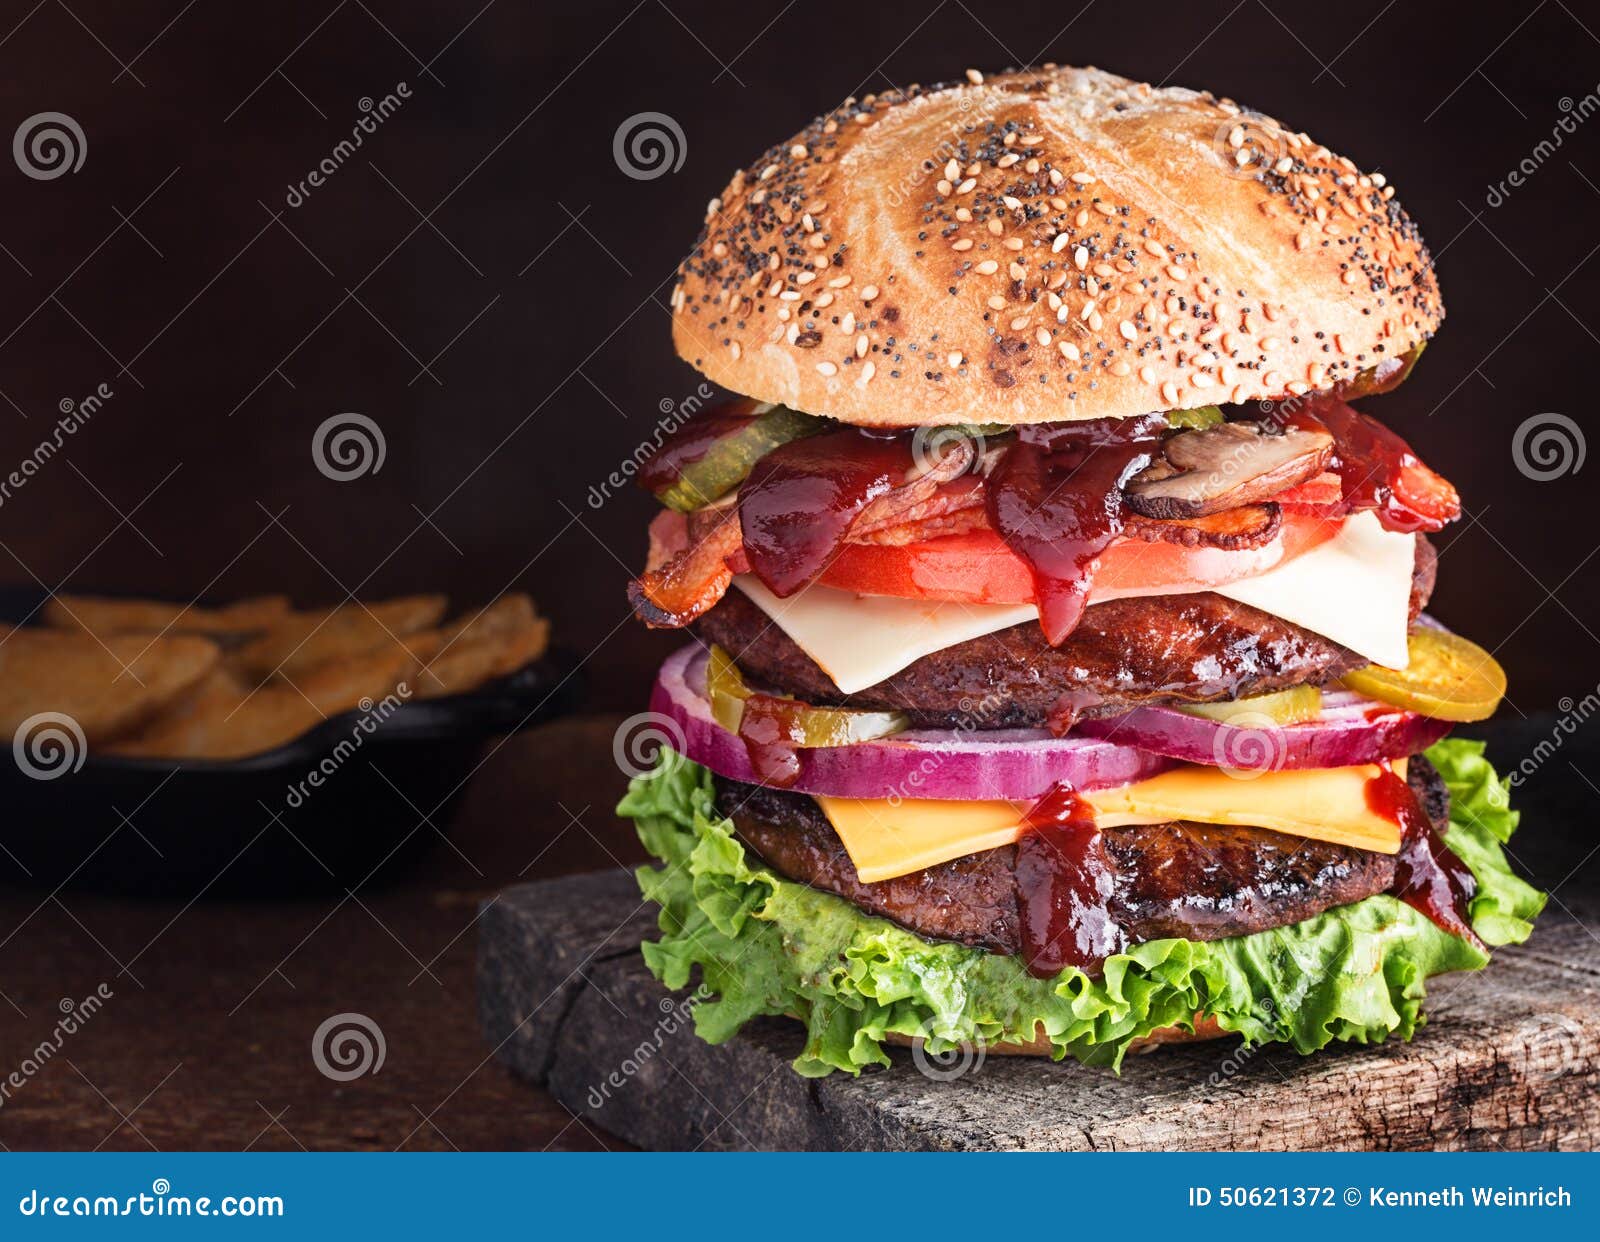 Double cheeseburger deluxe stock photo. Image of pickle - 50621372